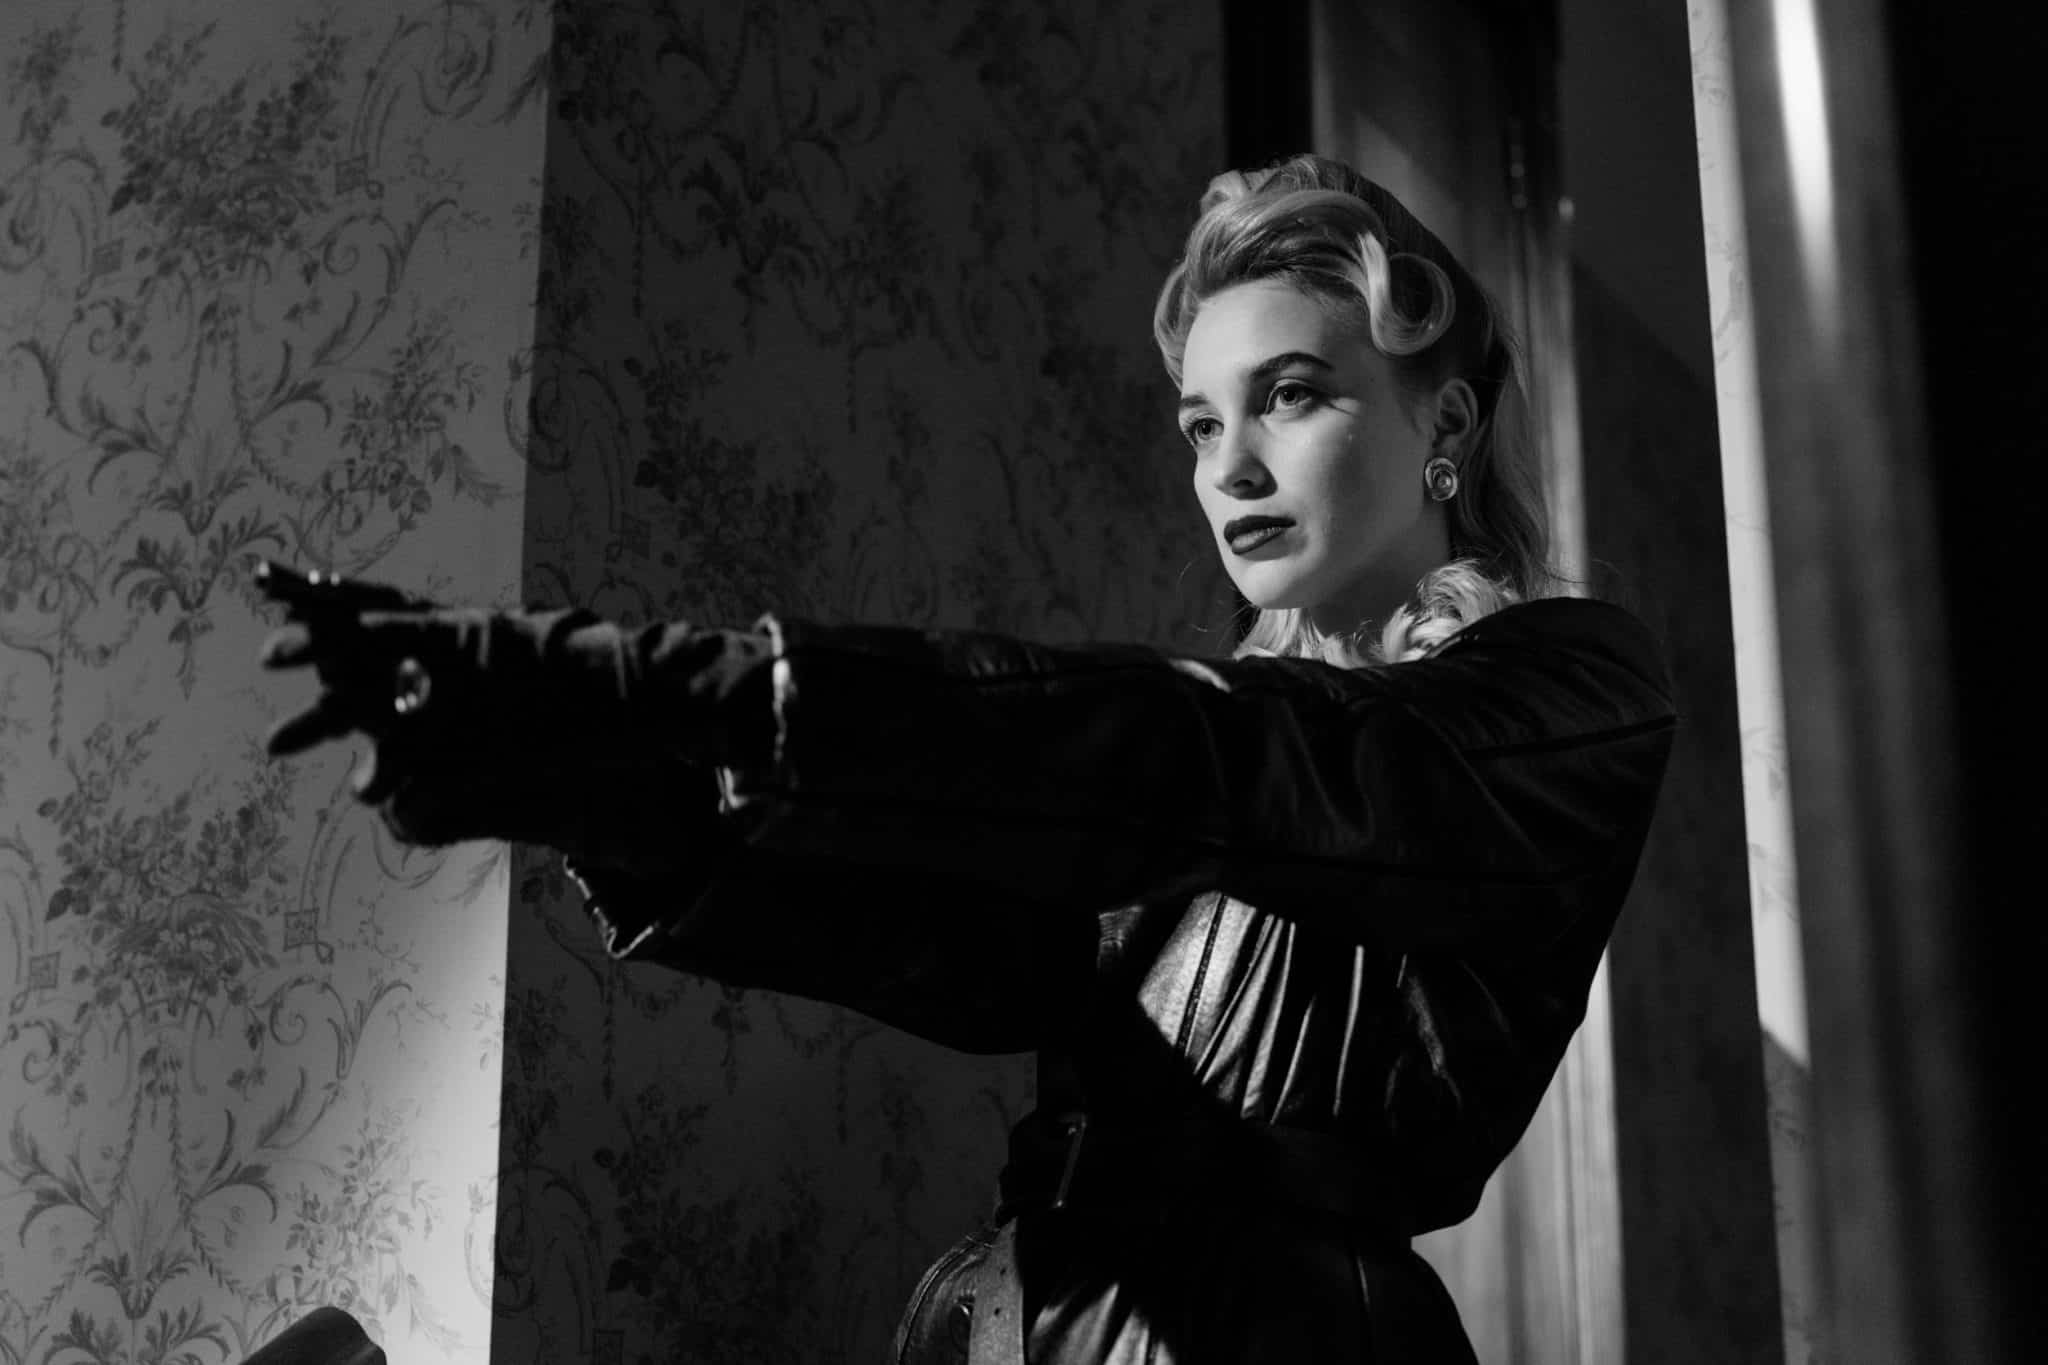 A woman pointing a gun in a black and white image.